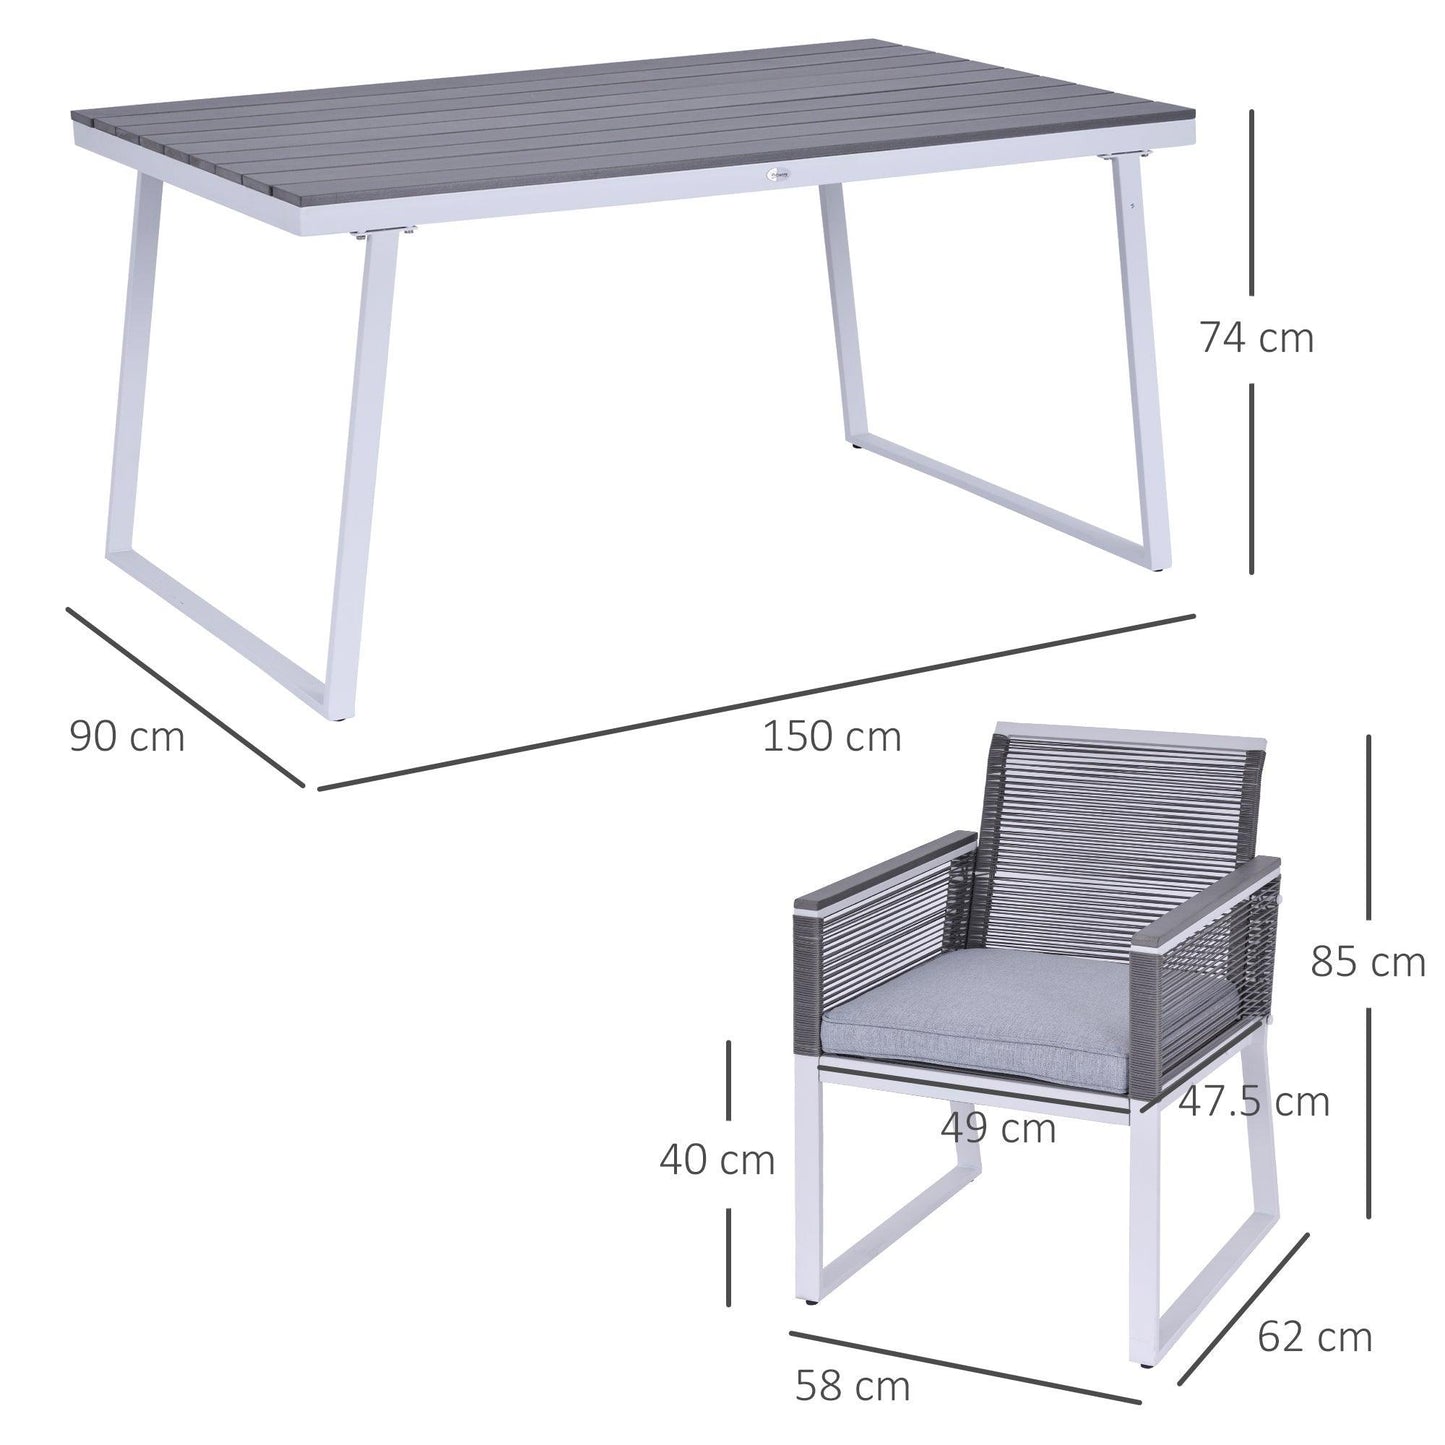 Outsunny 6-Person Outdoor Dining Set - Grey - ALL4U RETAILER LTD